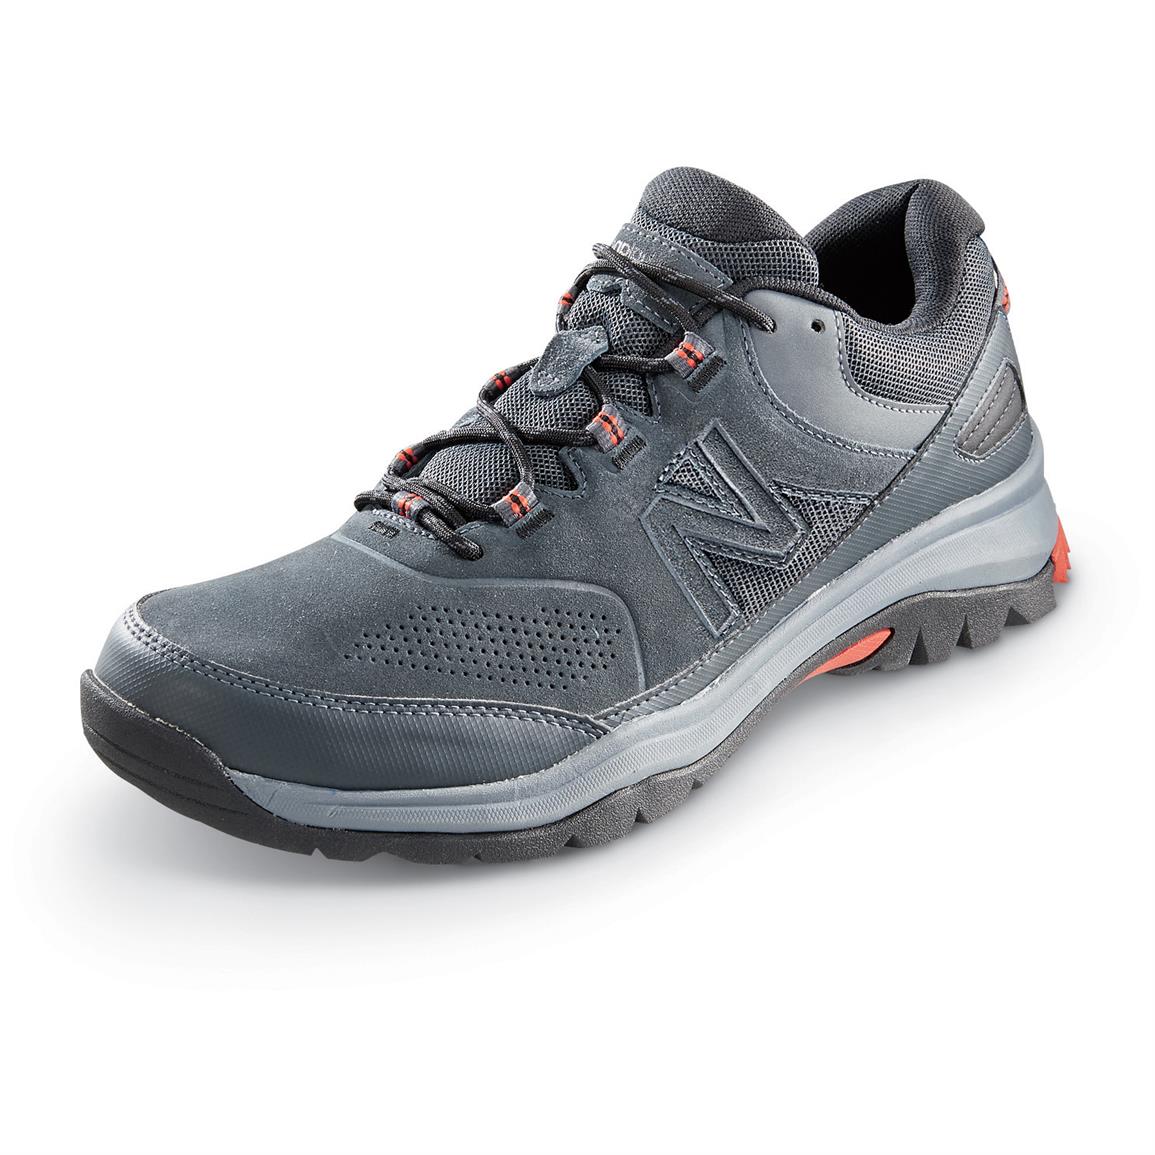 New Balance Men\u0027s 769 Country Walker Shoes, Gray / Red. Extra-extra-wide  sizes, too!